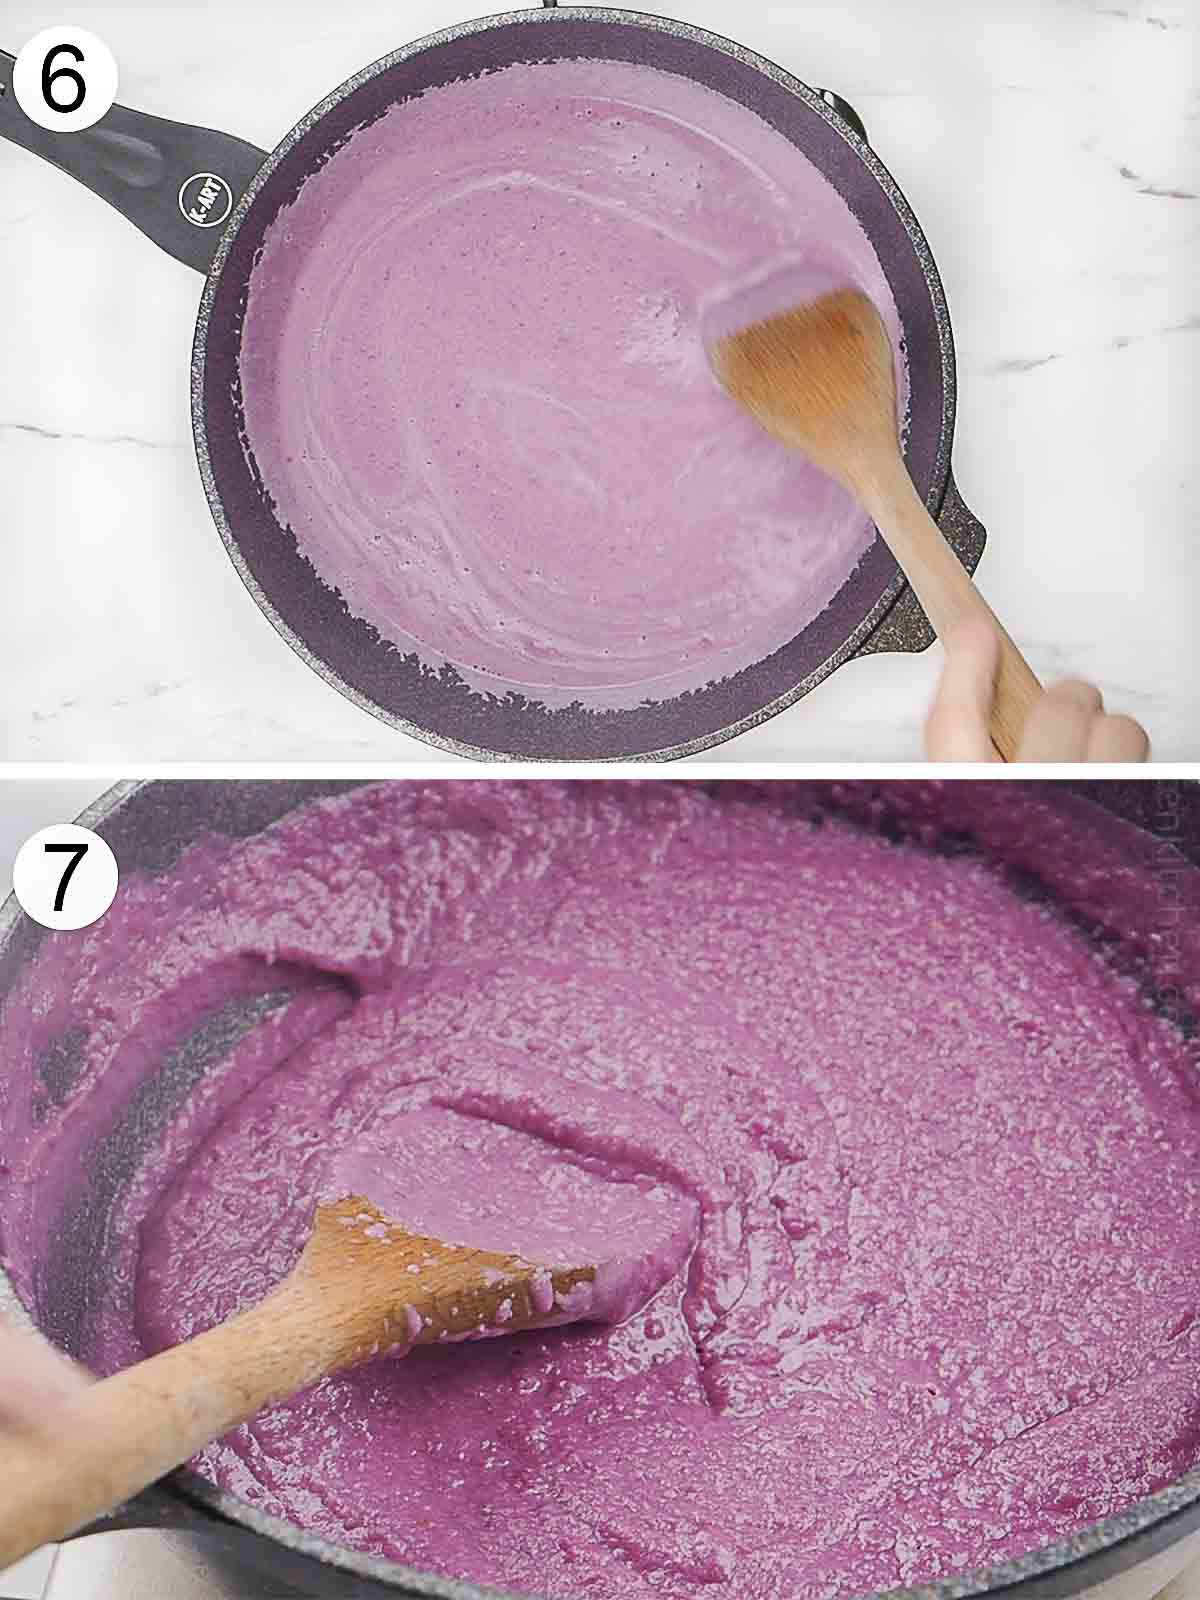 step-by-step process on how to cook ube halaya or ube jam.